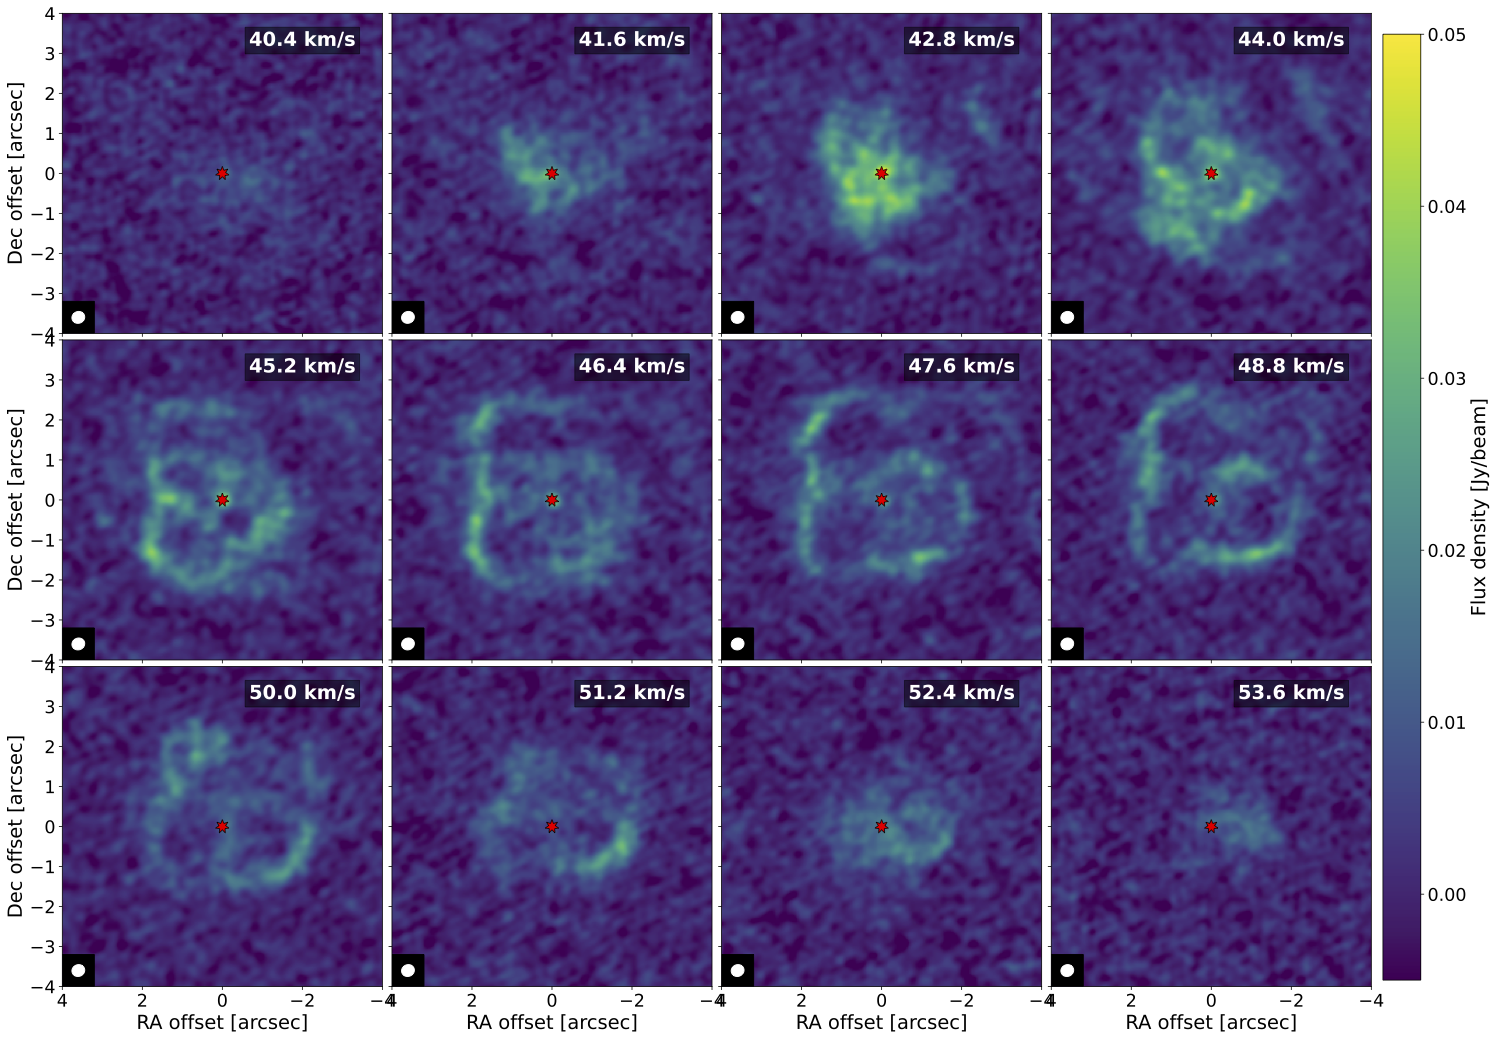 ALMA channel maps of the SO_2 line in R Aql